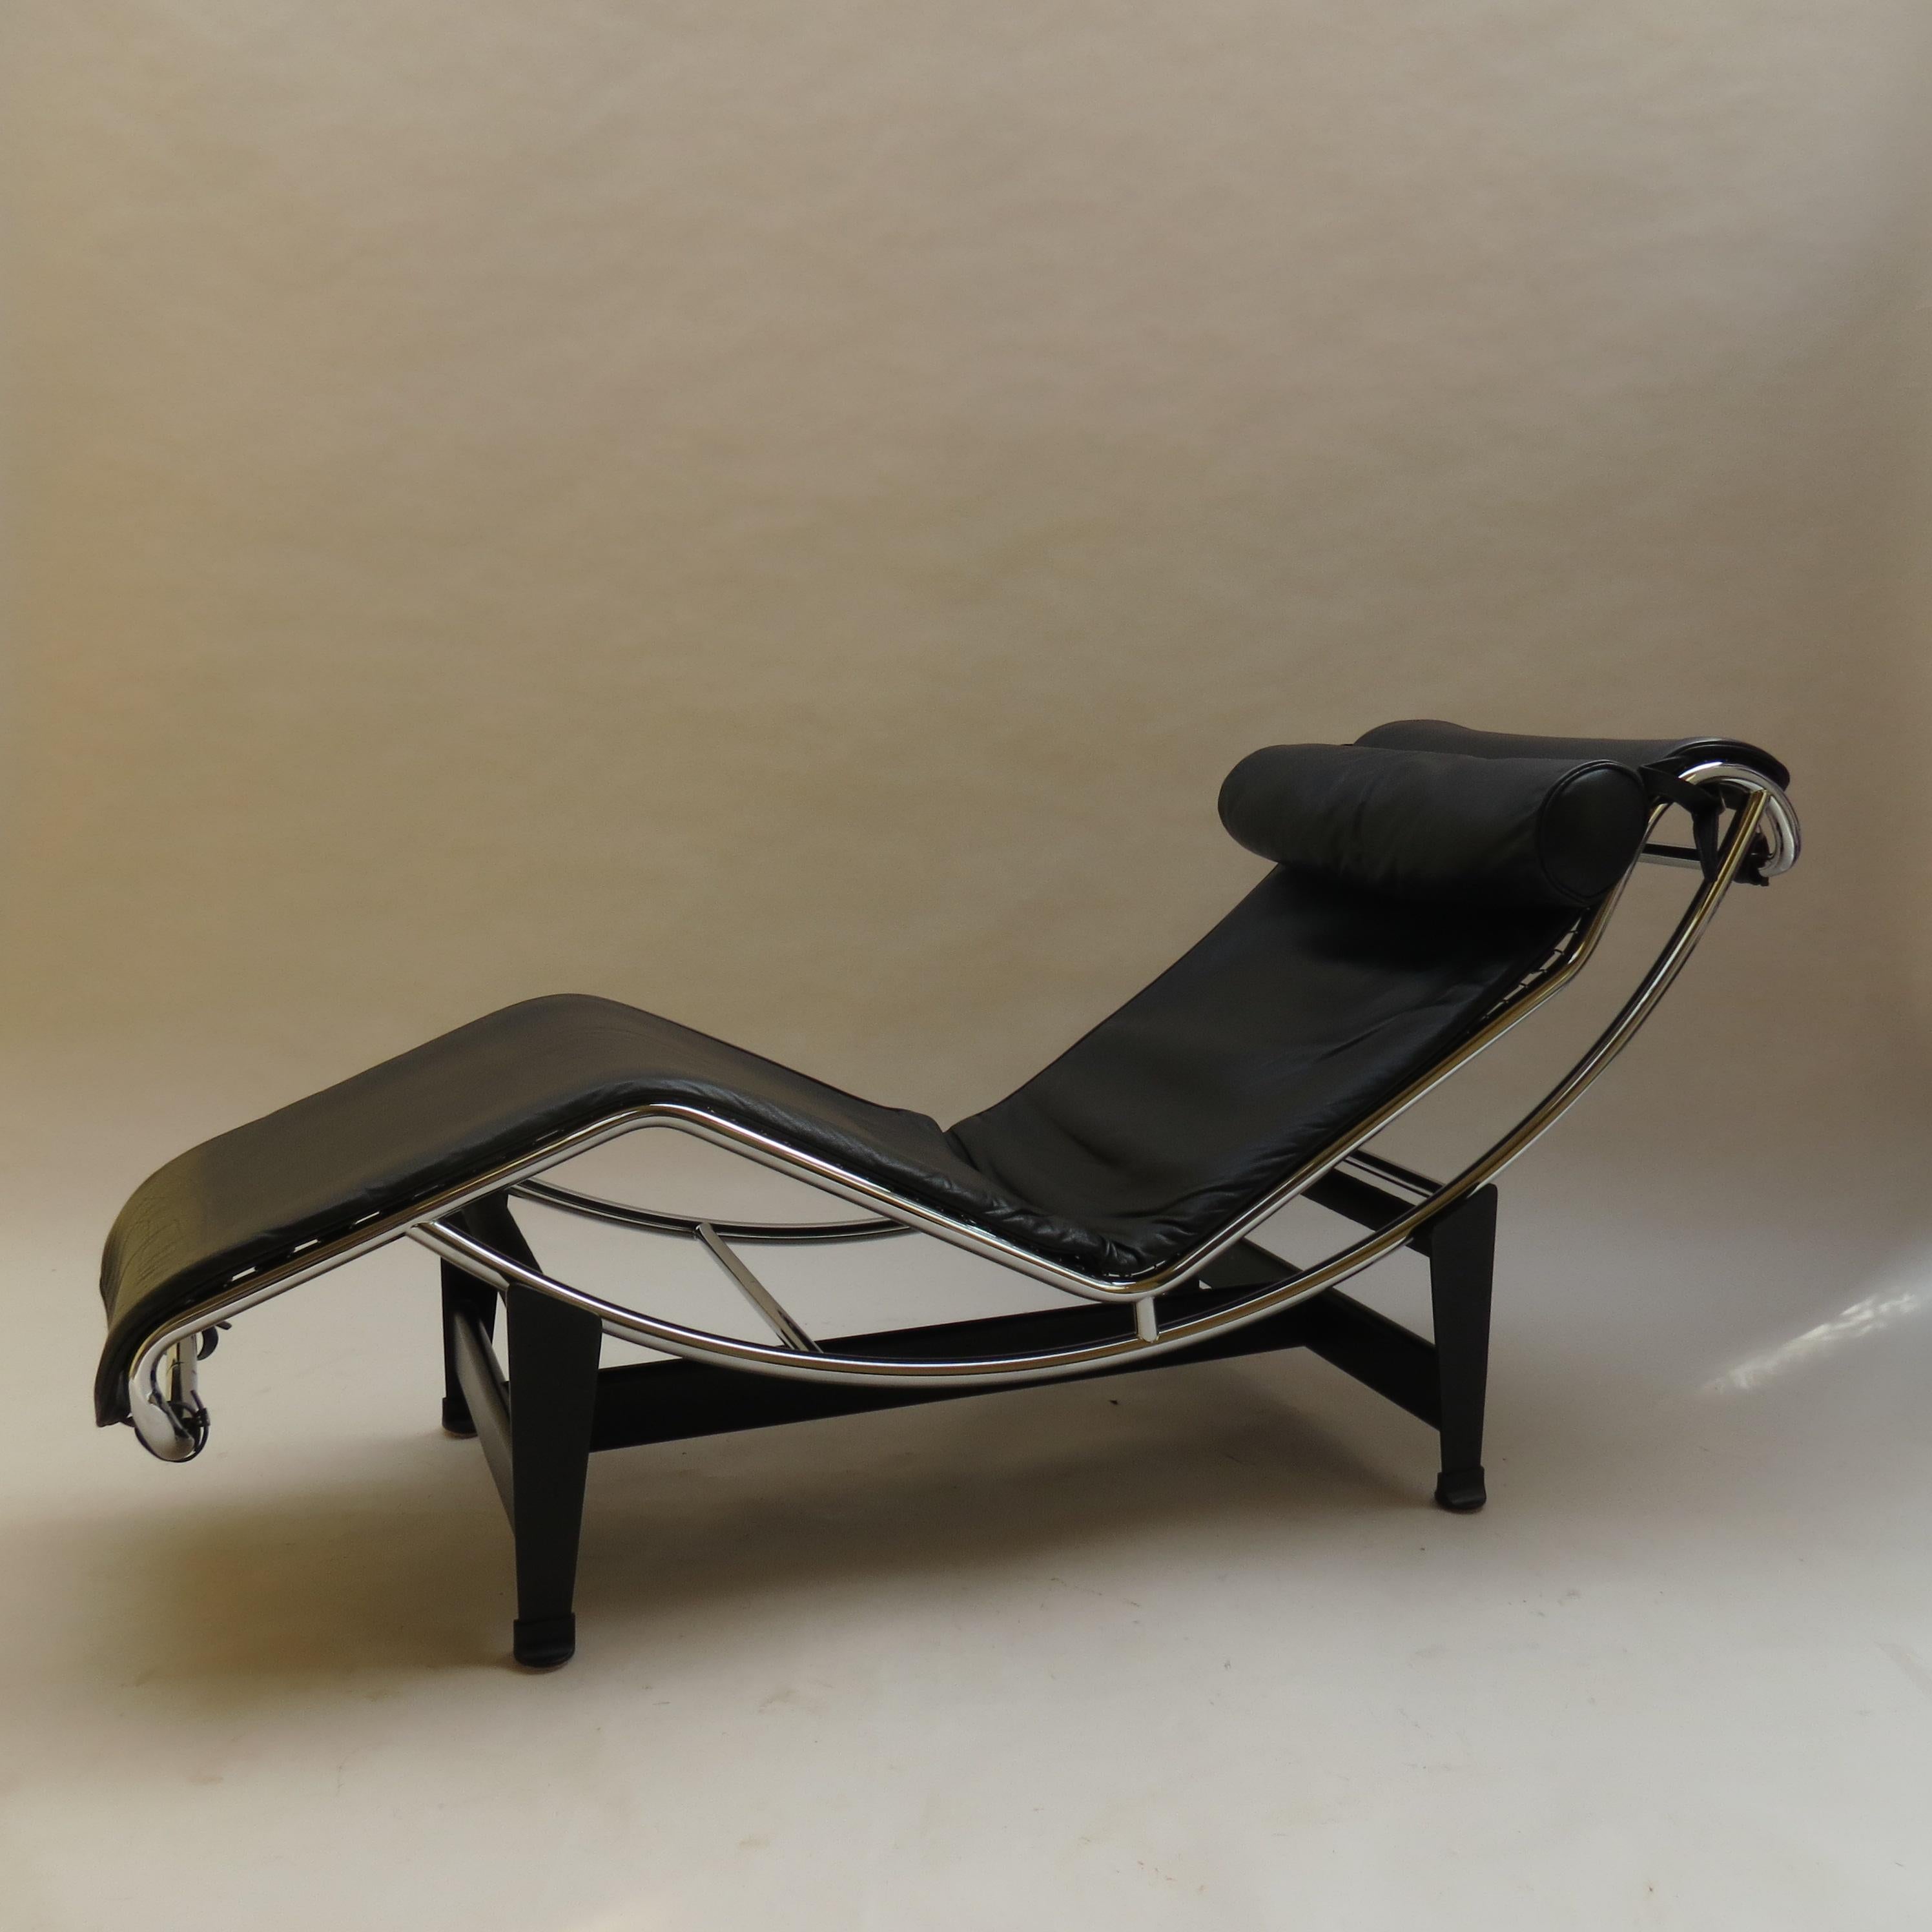 Machine-Made 1970s LC4 Chaise Longue by Le Corbusier Perriand and Jeanneret for Cassina